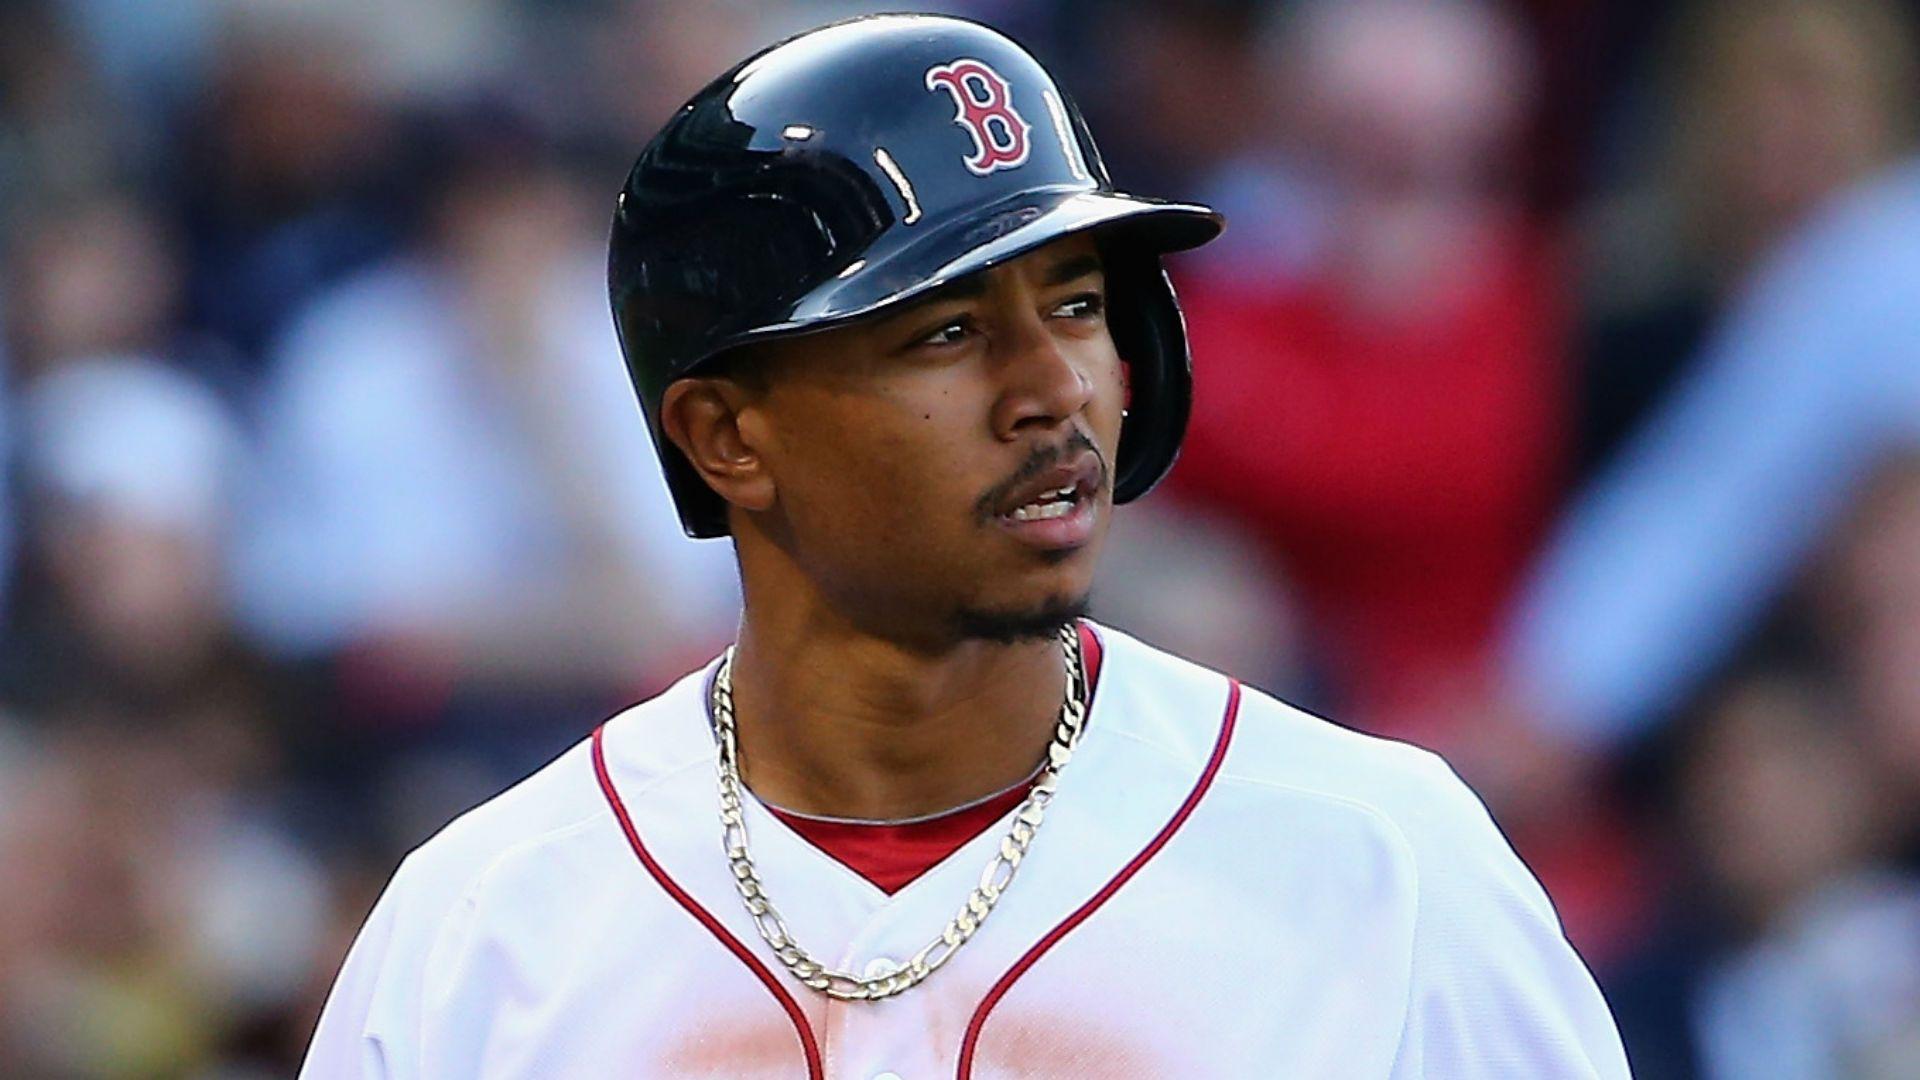 Red Sox OF Mookie Betts drove his golf cart into a lake. MLB